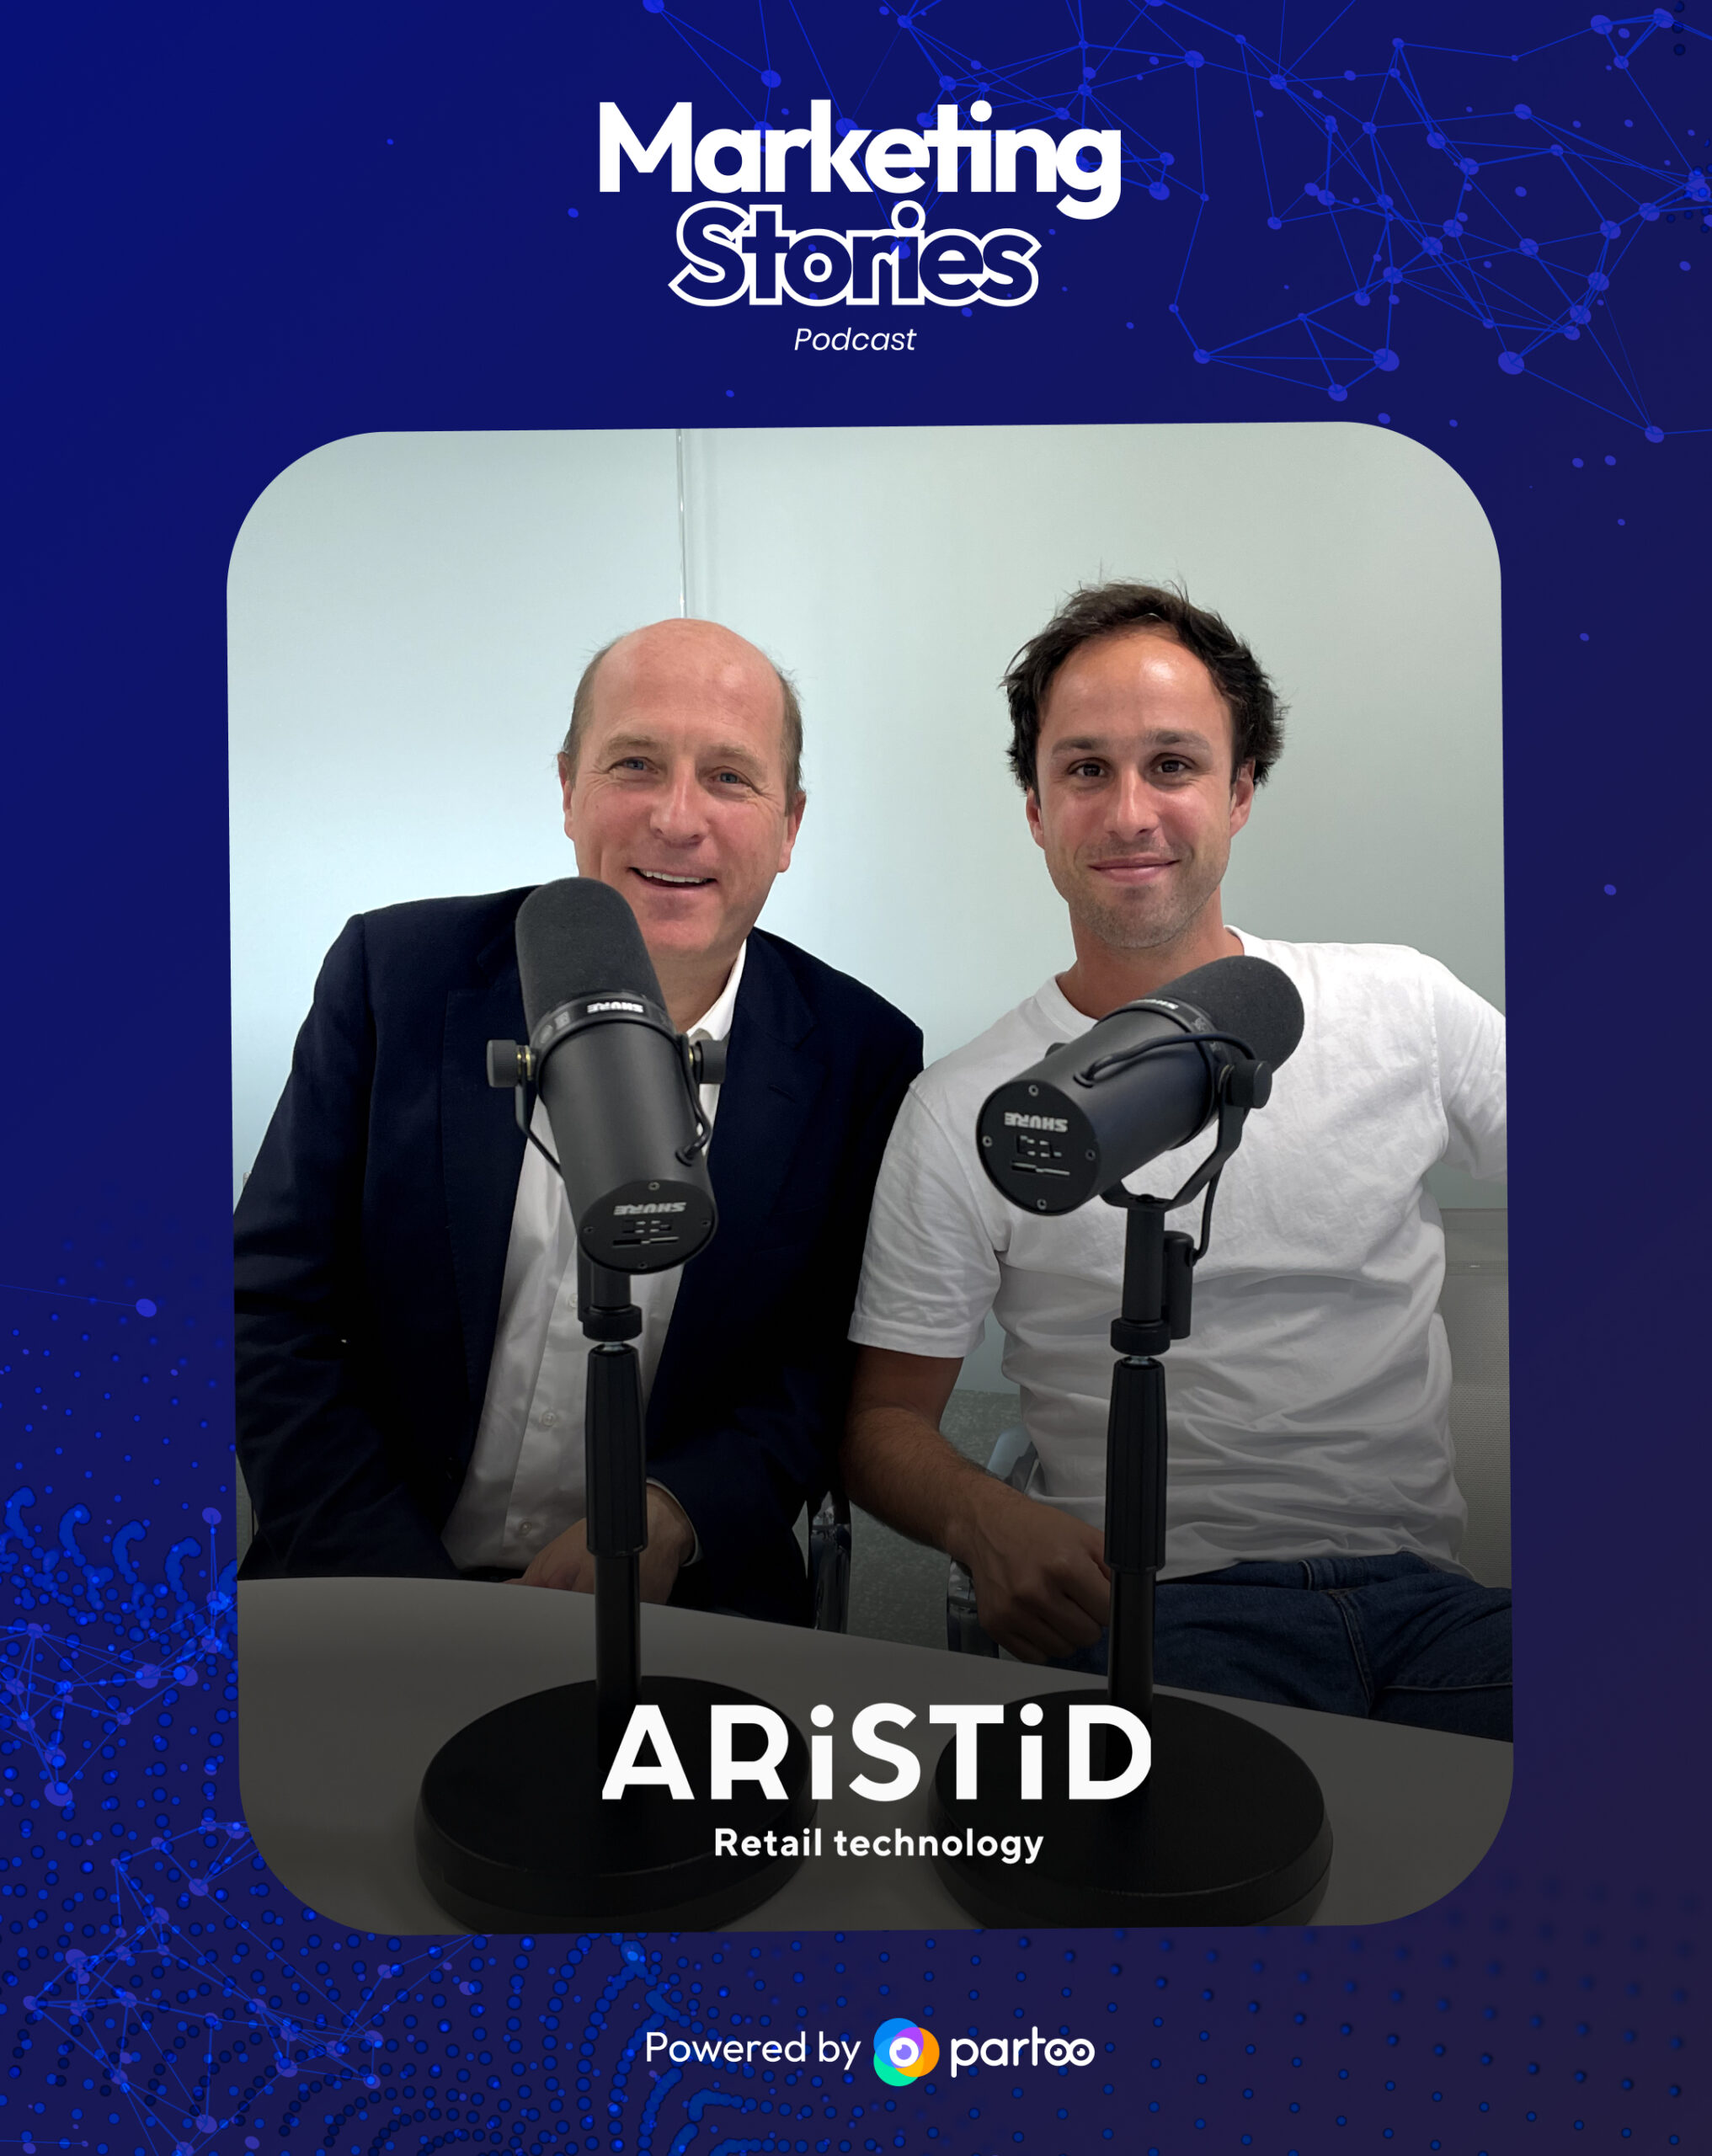 Marketing Stories by Partoo: ARISTID takes the stage